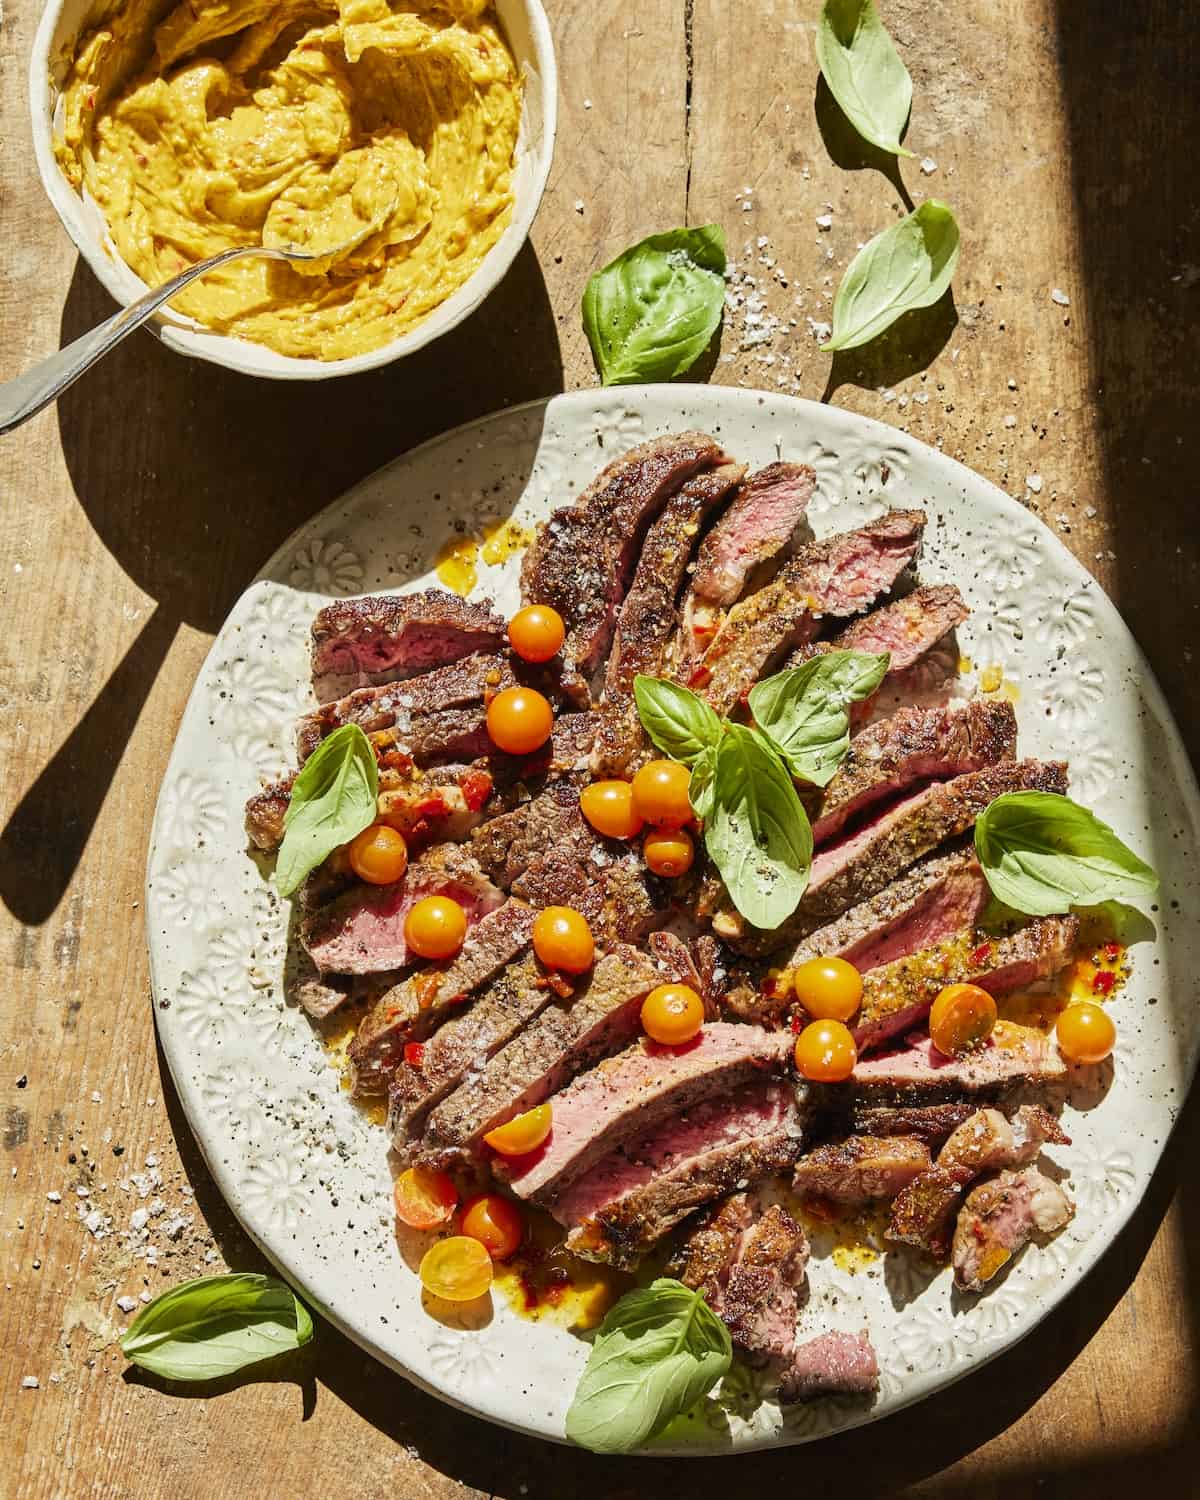 Strips of cut ribeye sitting on a plate topped with halved cherry tomatoes and leaves of basil.  The plate is sitting next to a dish of Calabrian chile butter.